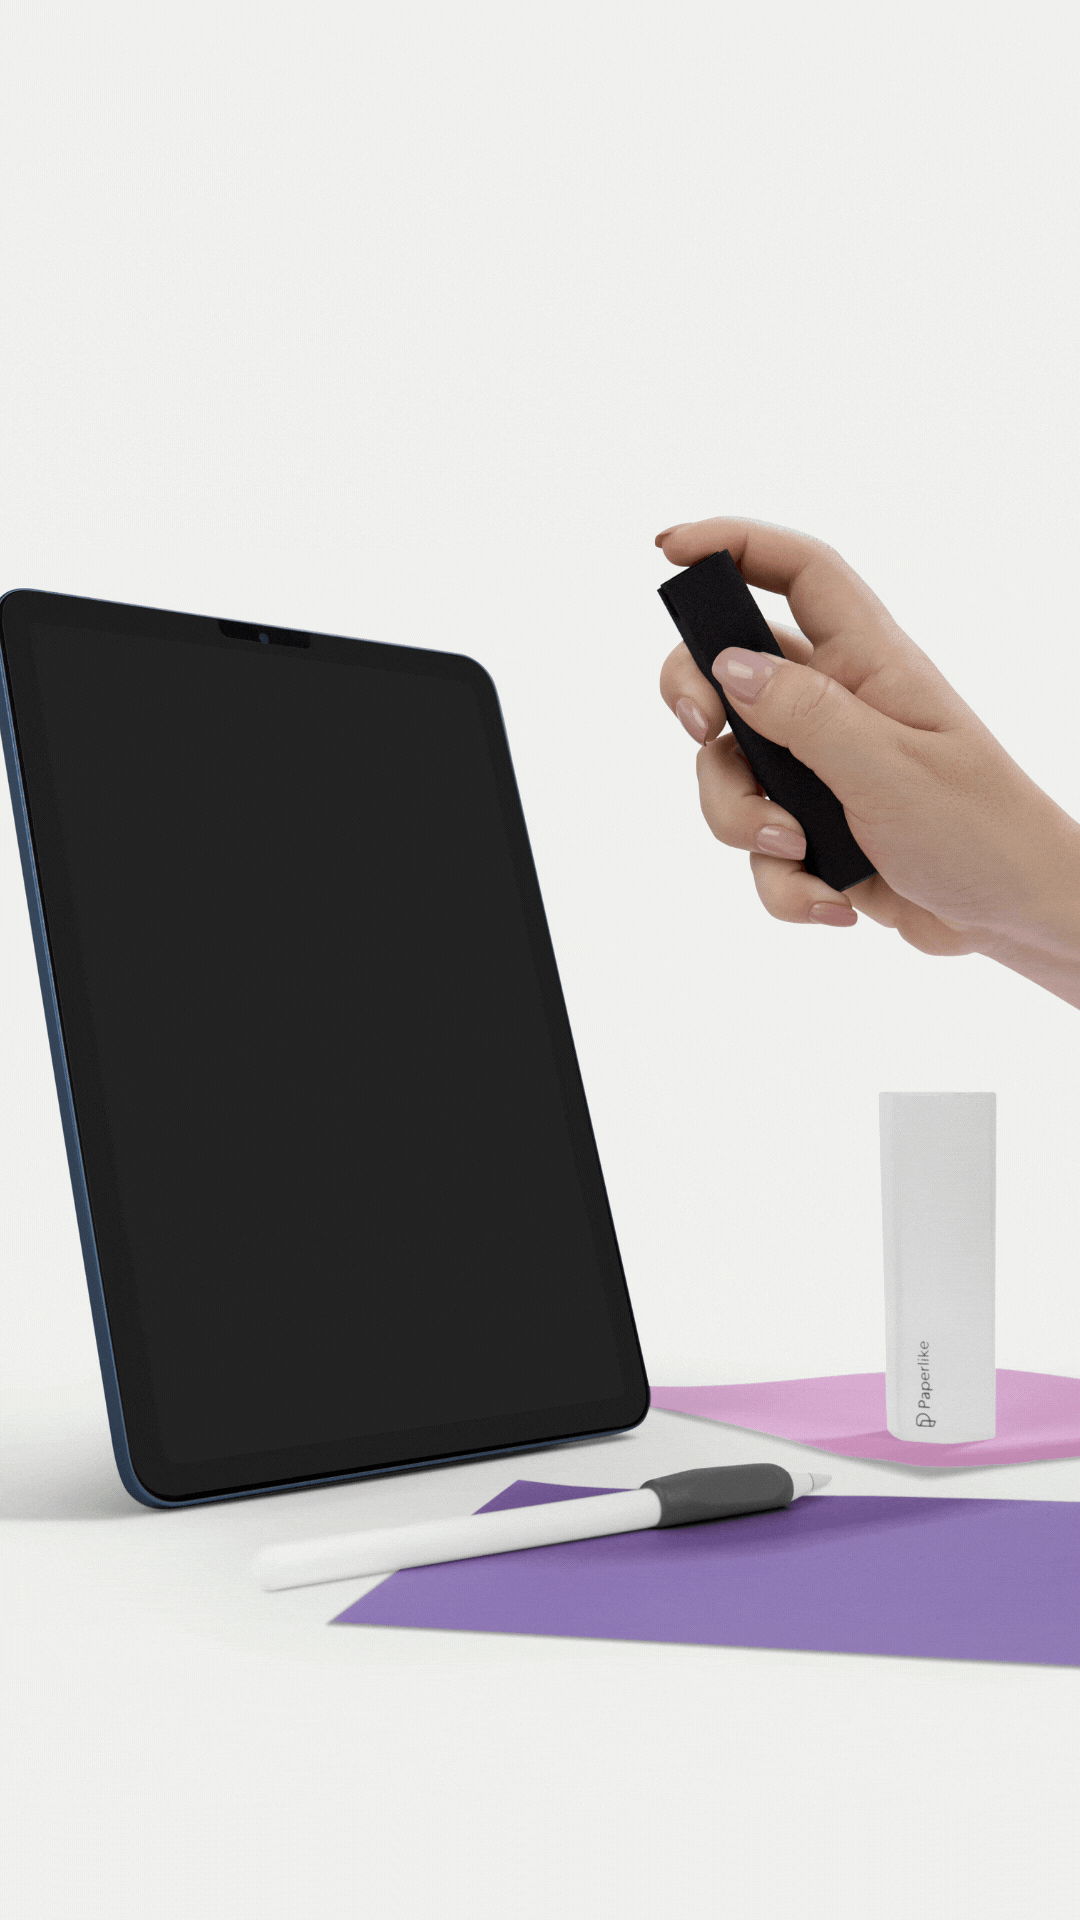 Paperlike Cleaning Kit iPad screen cleaner up to 500 cleans